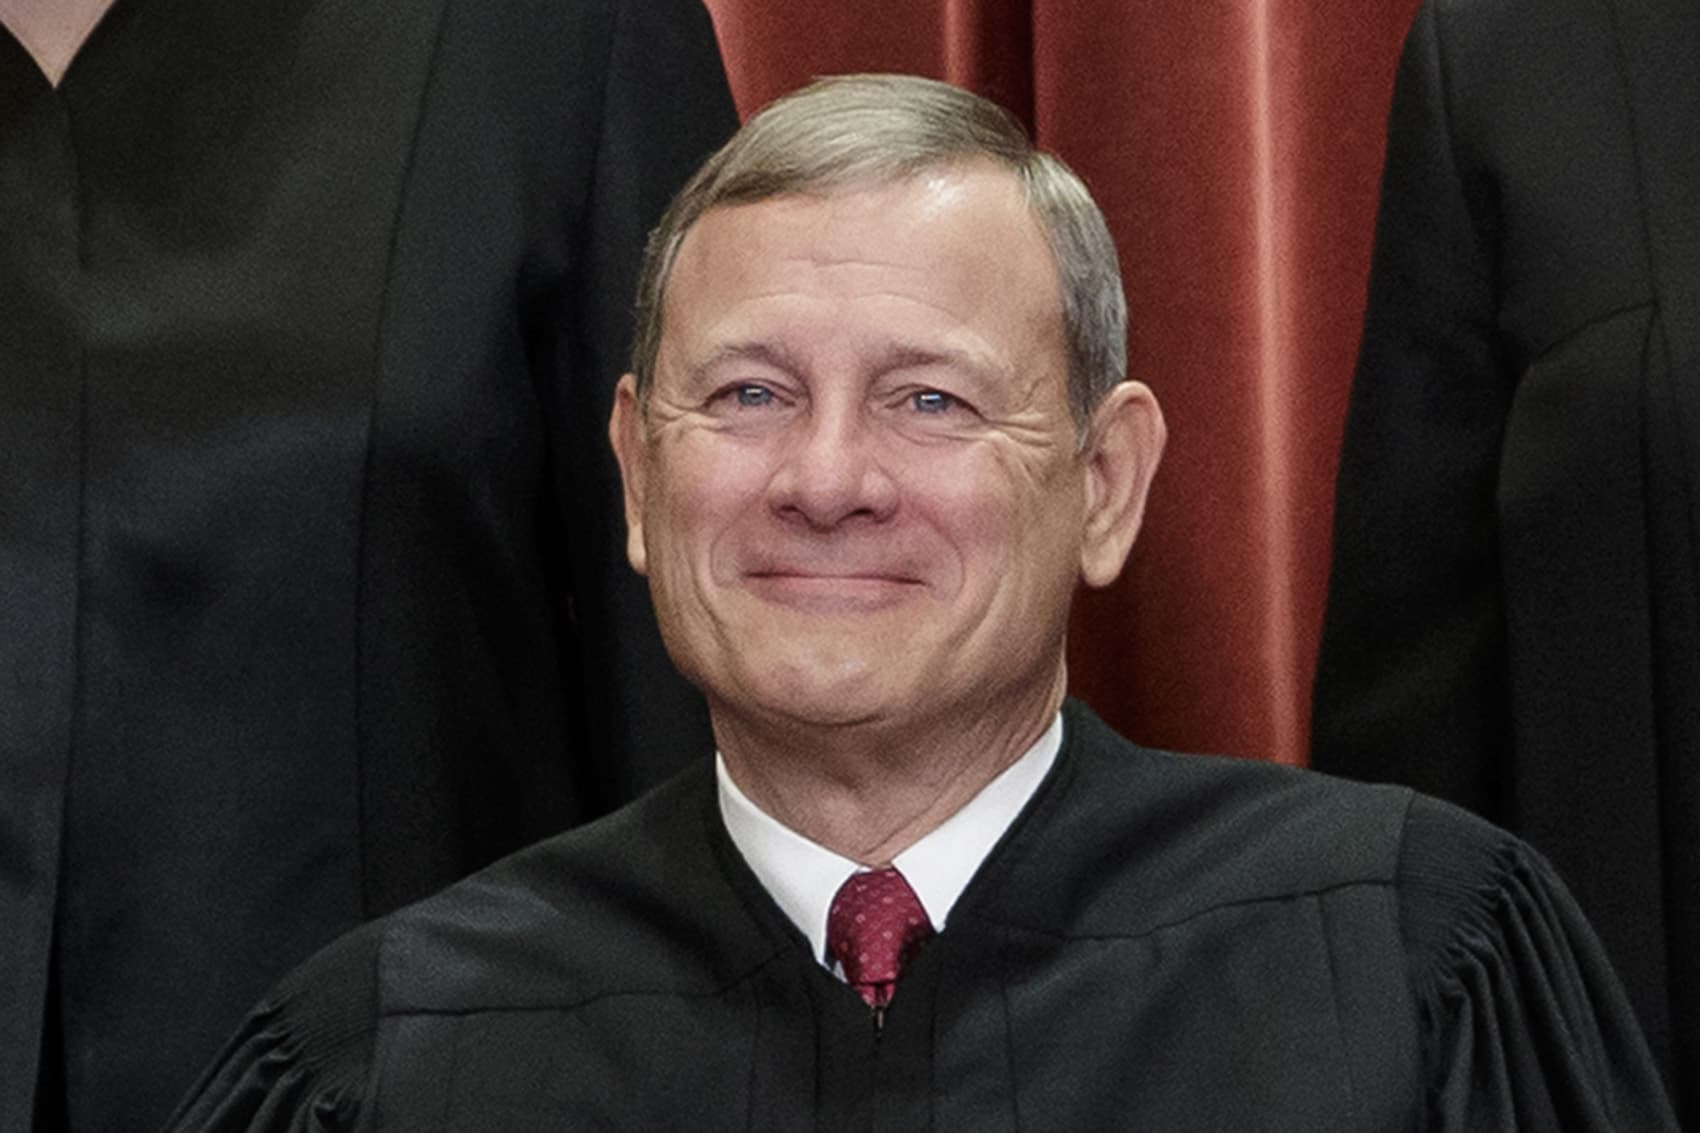 Who Is The Chief Justice Of The United States Now?